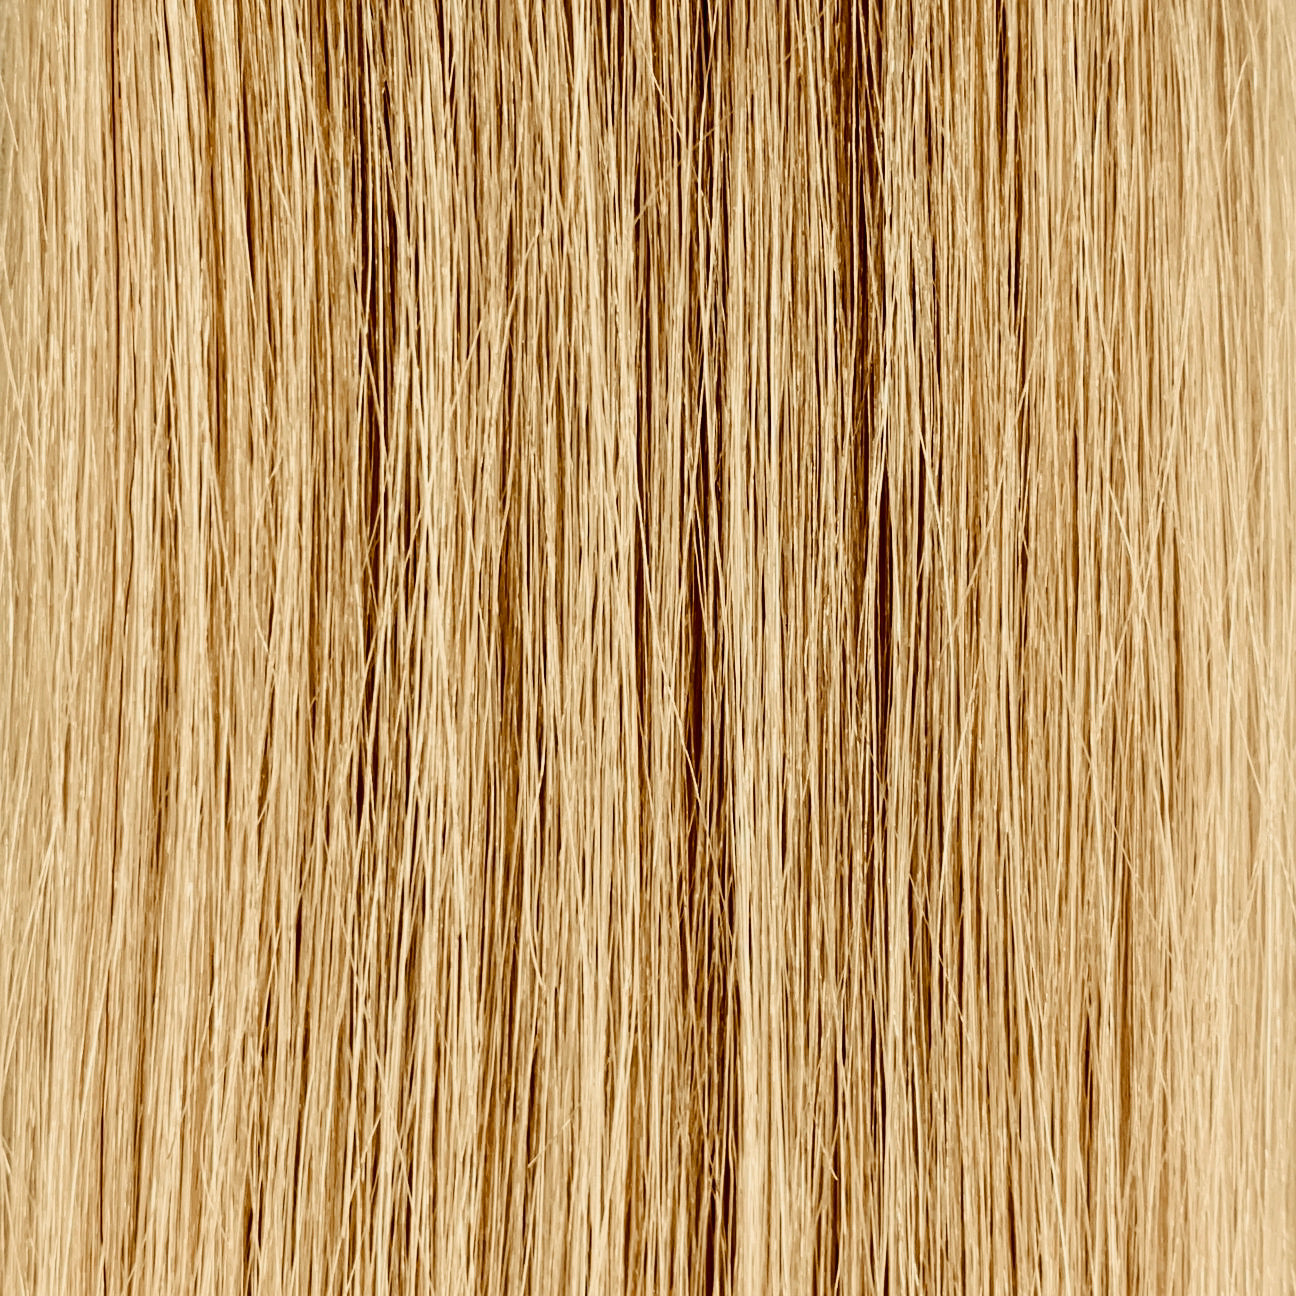 50 cm | Normal Tape Extensions | No. 14 dunkelblond-gold